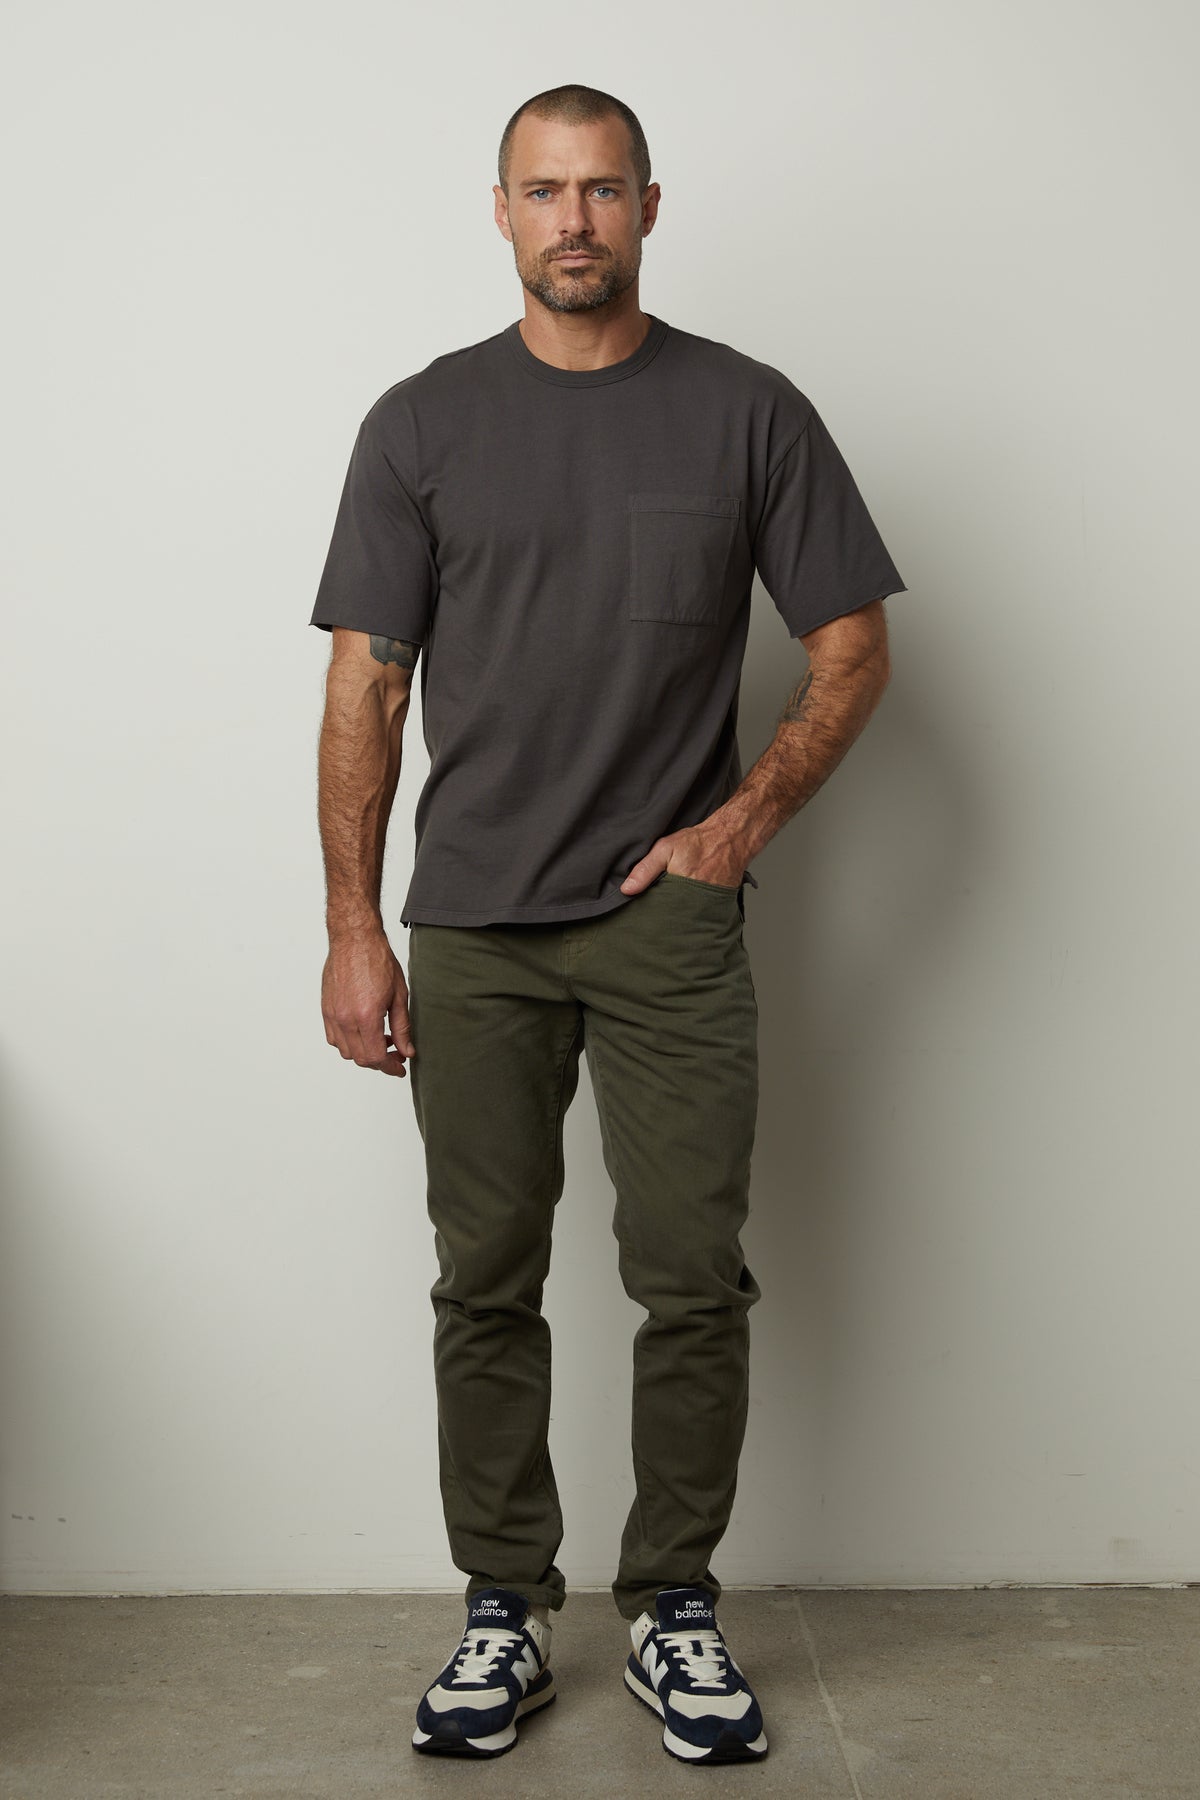 A man wearing Velvet by Graham & Spencer JOSEPH COTTON CANVAS PANT, made of cotton canvas material, and a t-shirt.-26860194037953